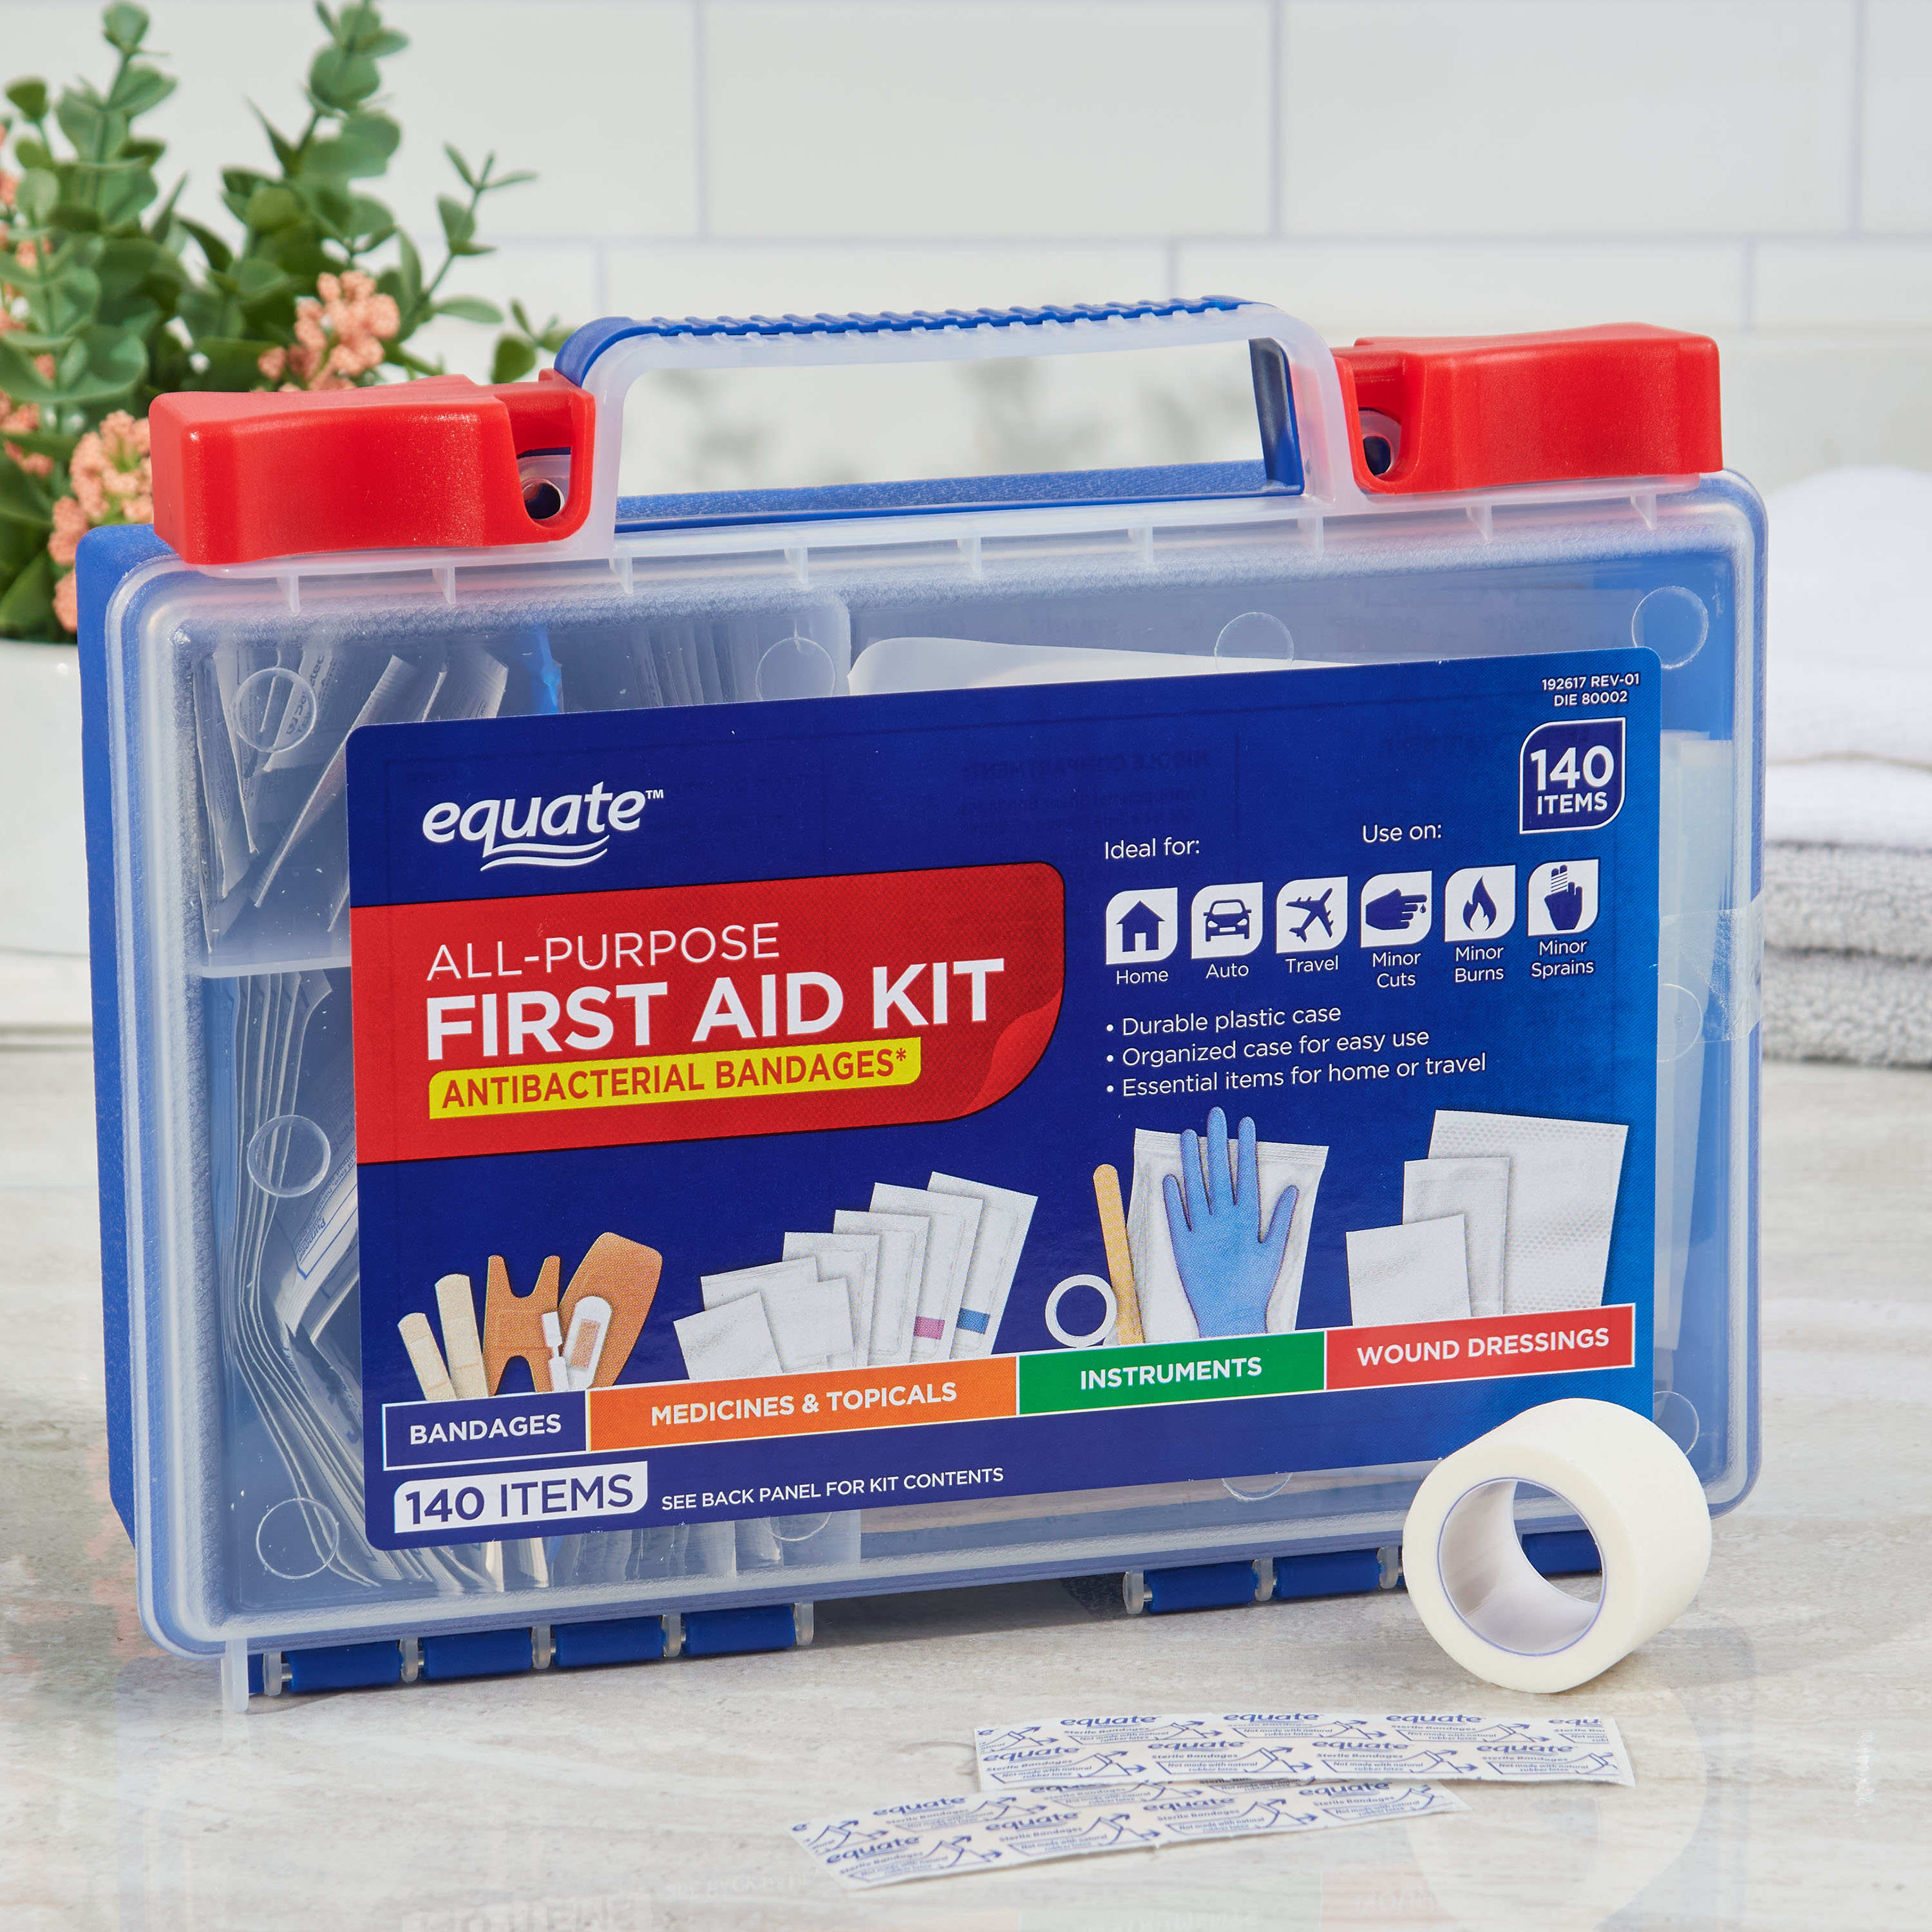 Equate 140pc All Purpose First Aid Kit - image 3 of 11